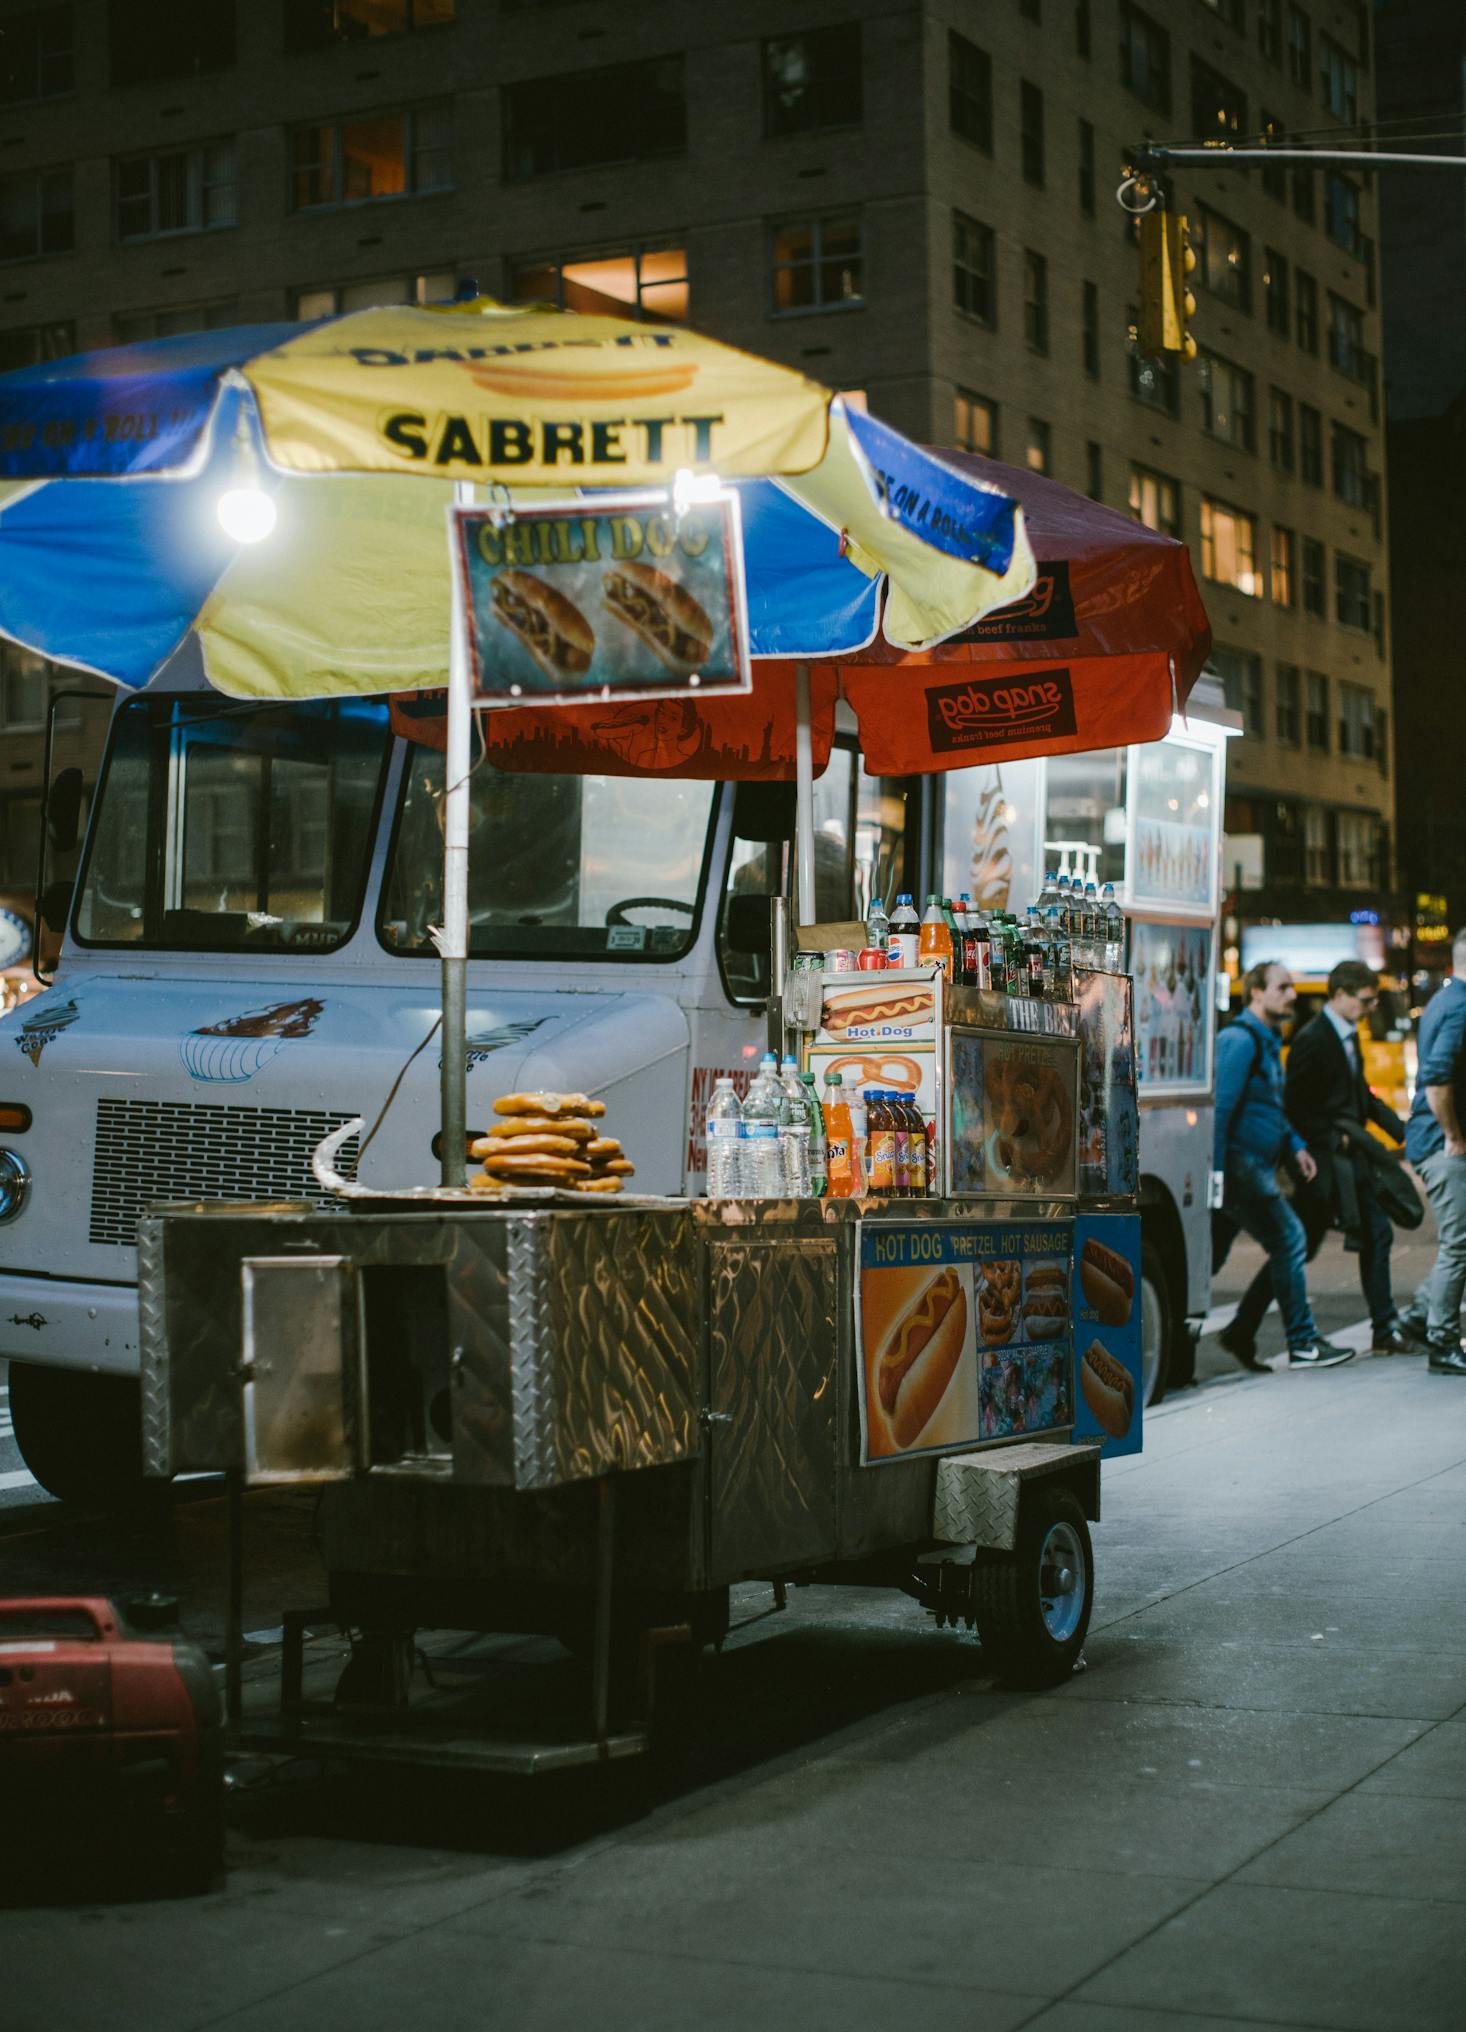 Hot dog stands in NYC